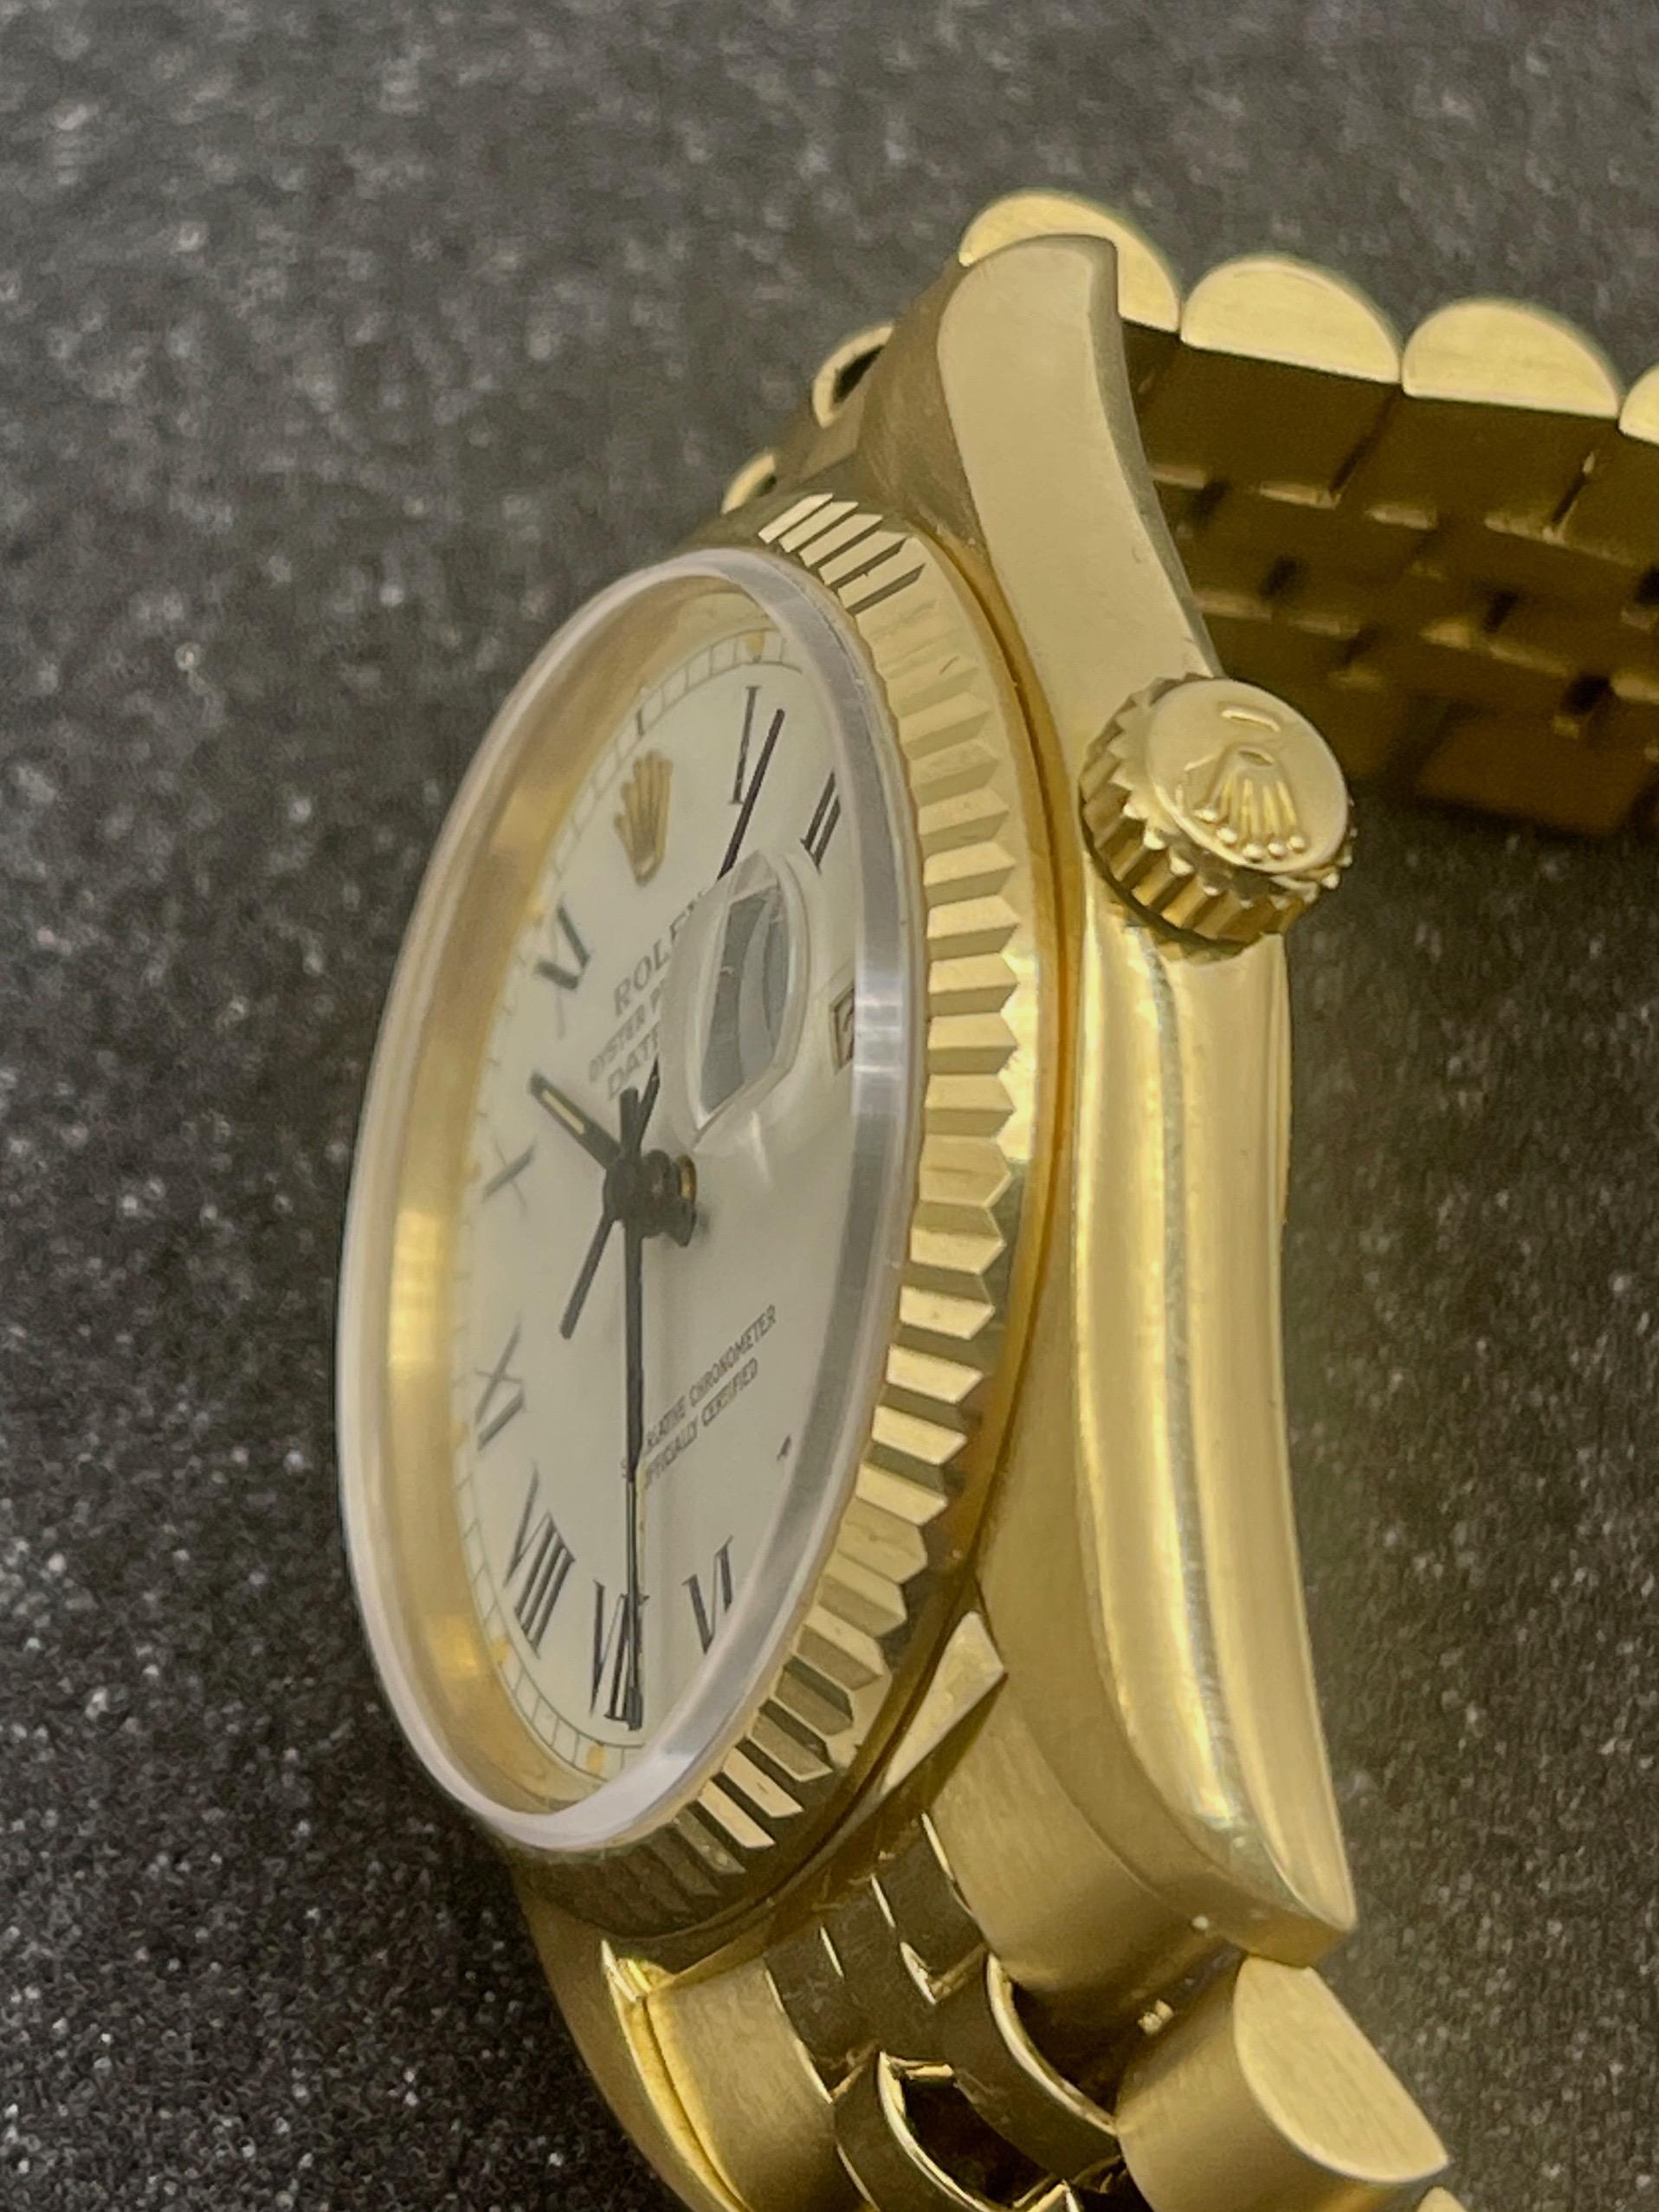 Rolex Datejust 18k Gold Reference 16018 Watch 7